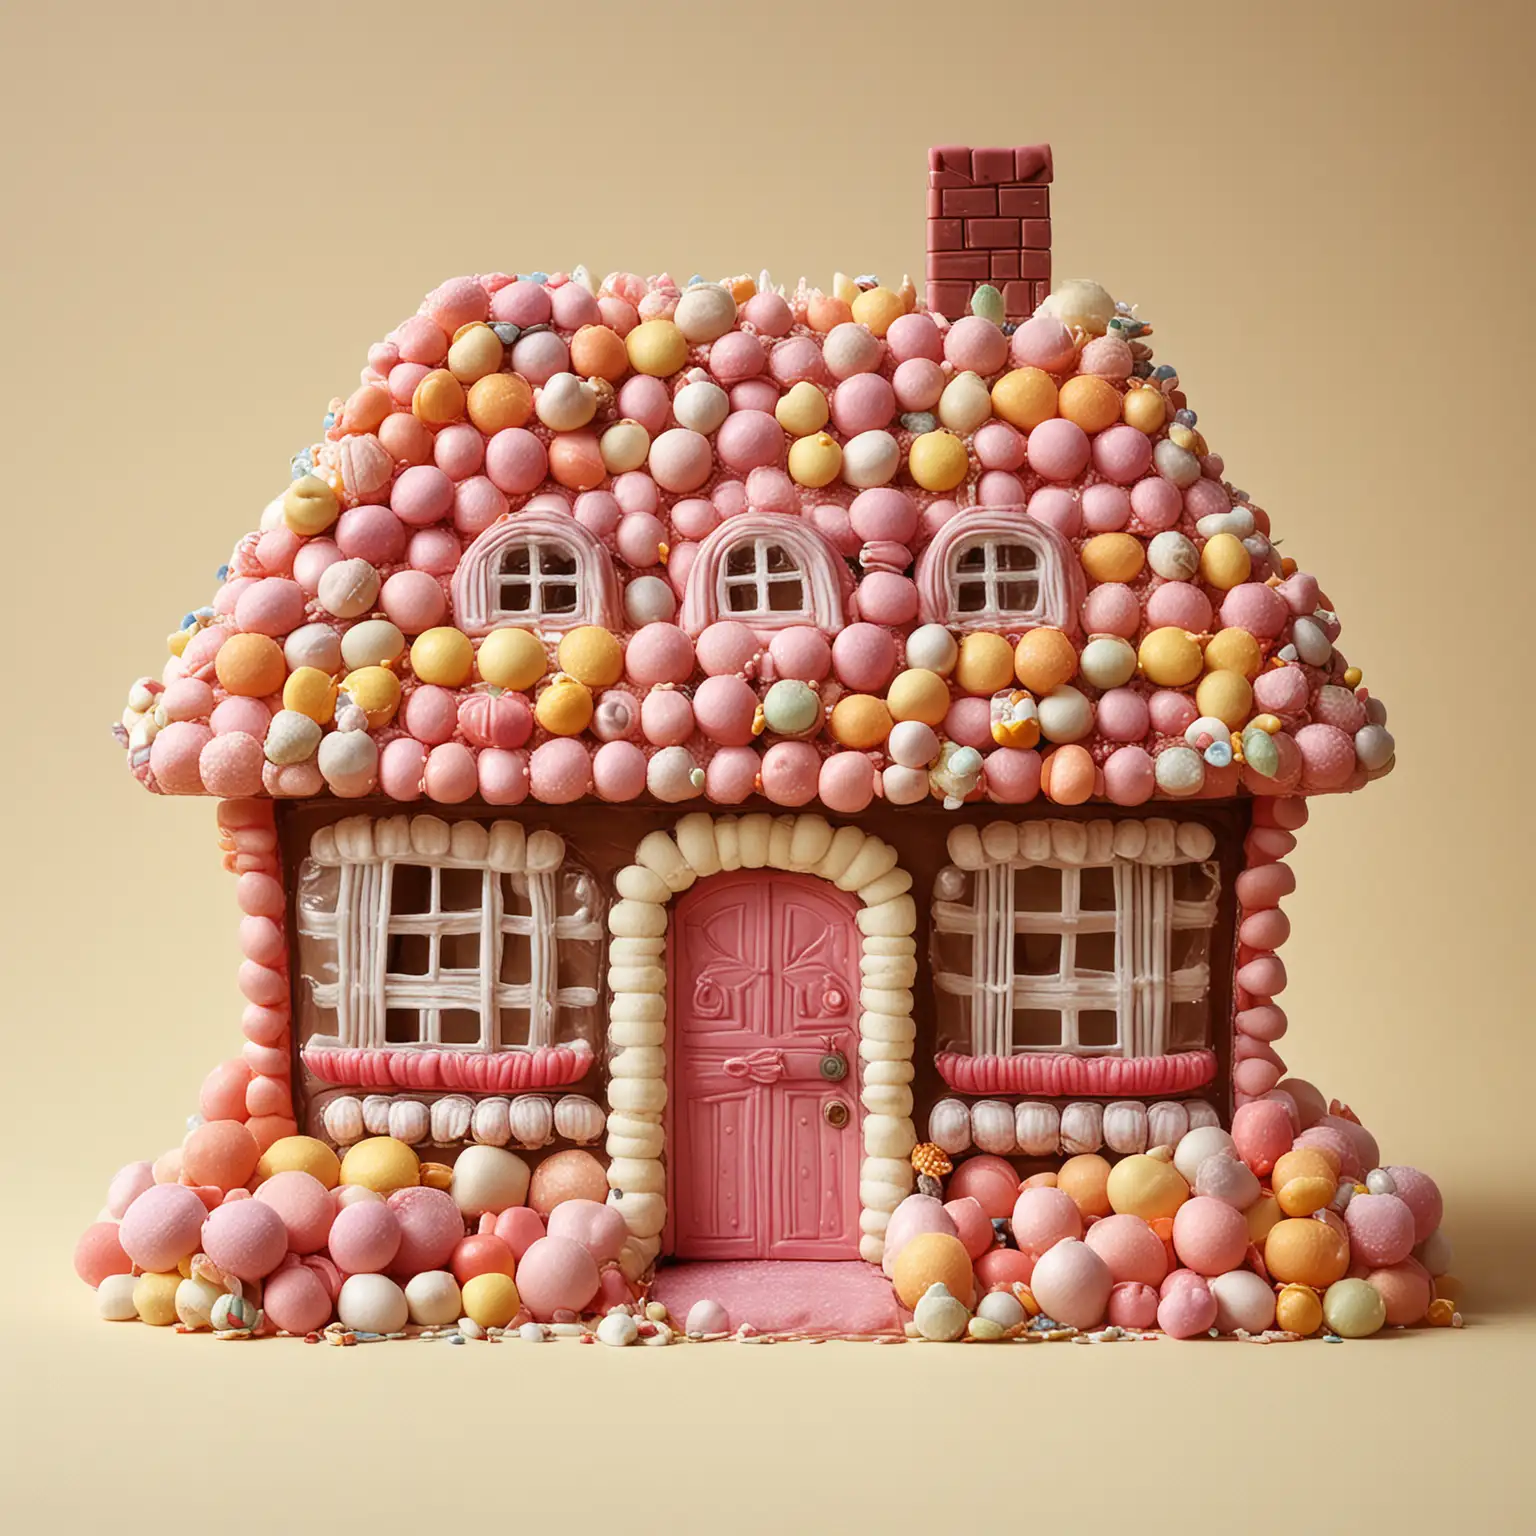 A house made of sweets